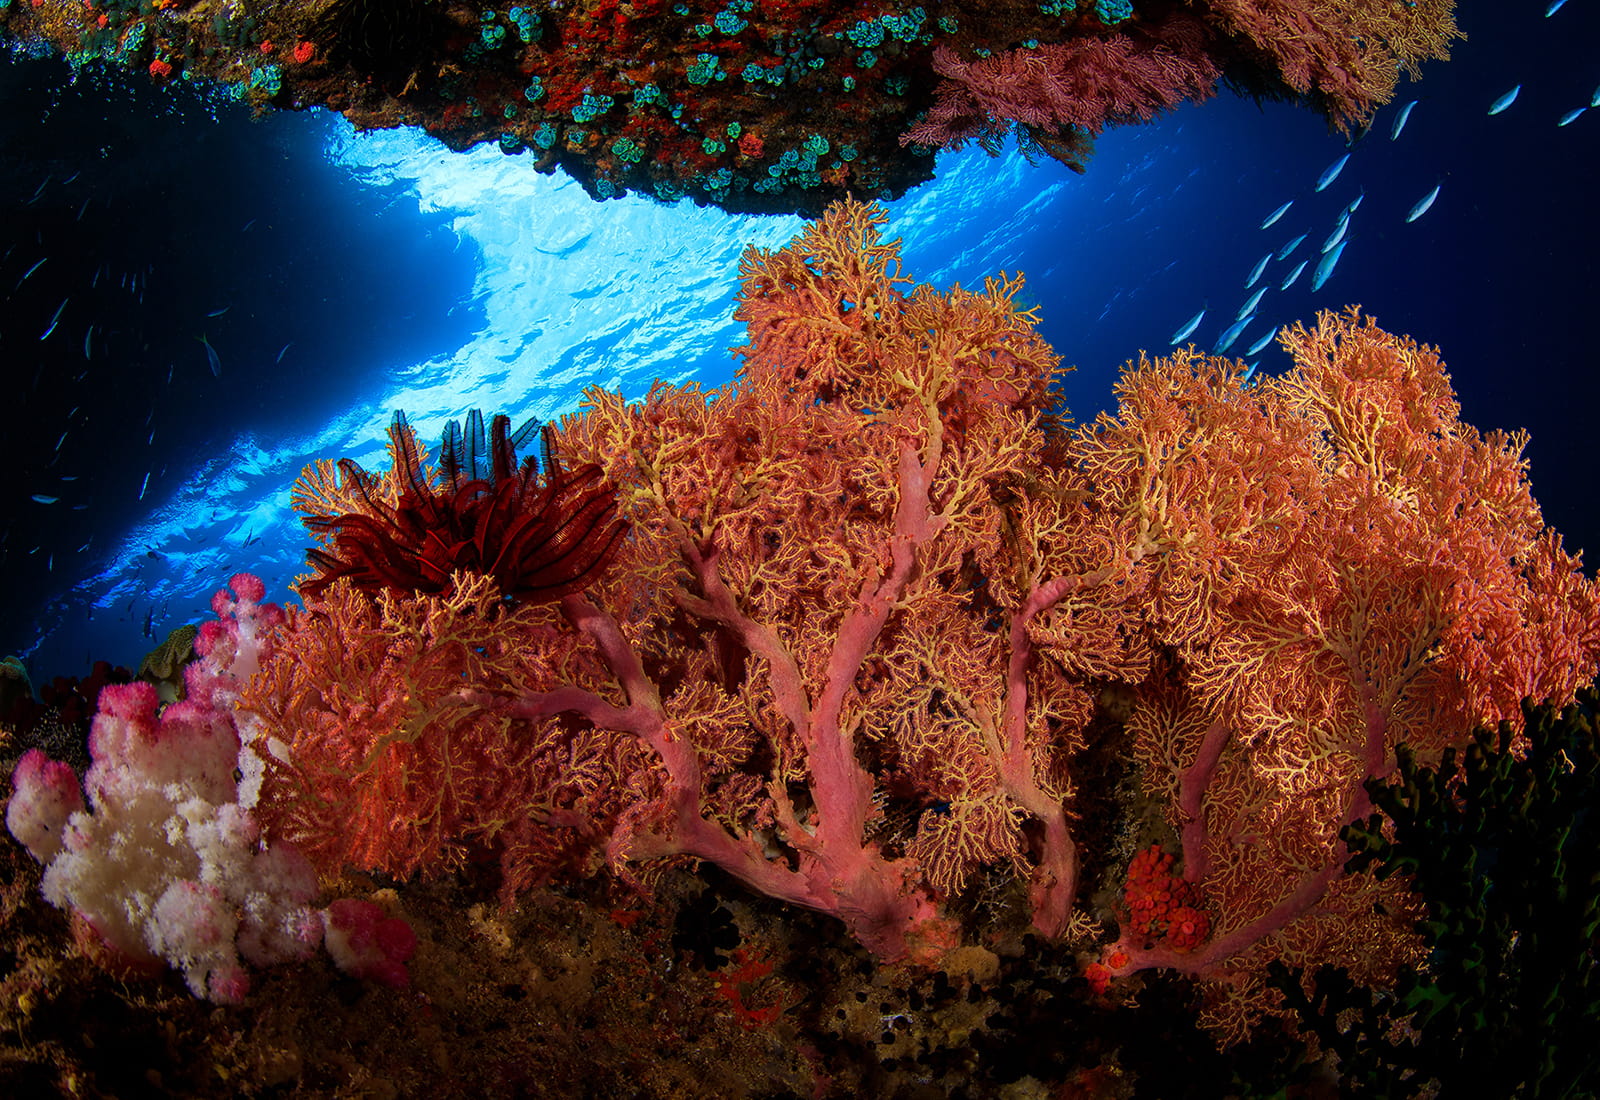 Coral reef off the coast of Indonesia.